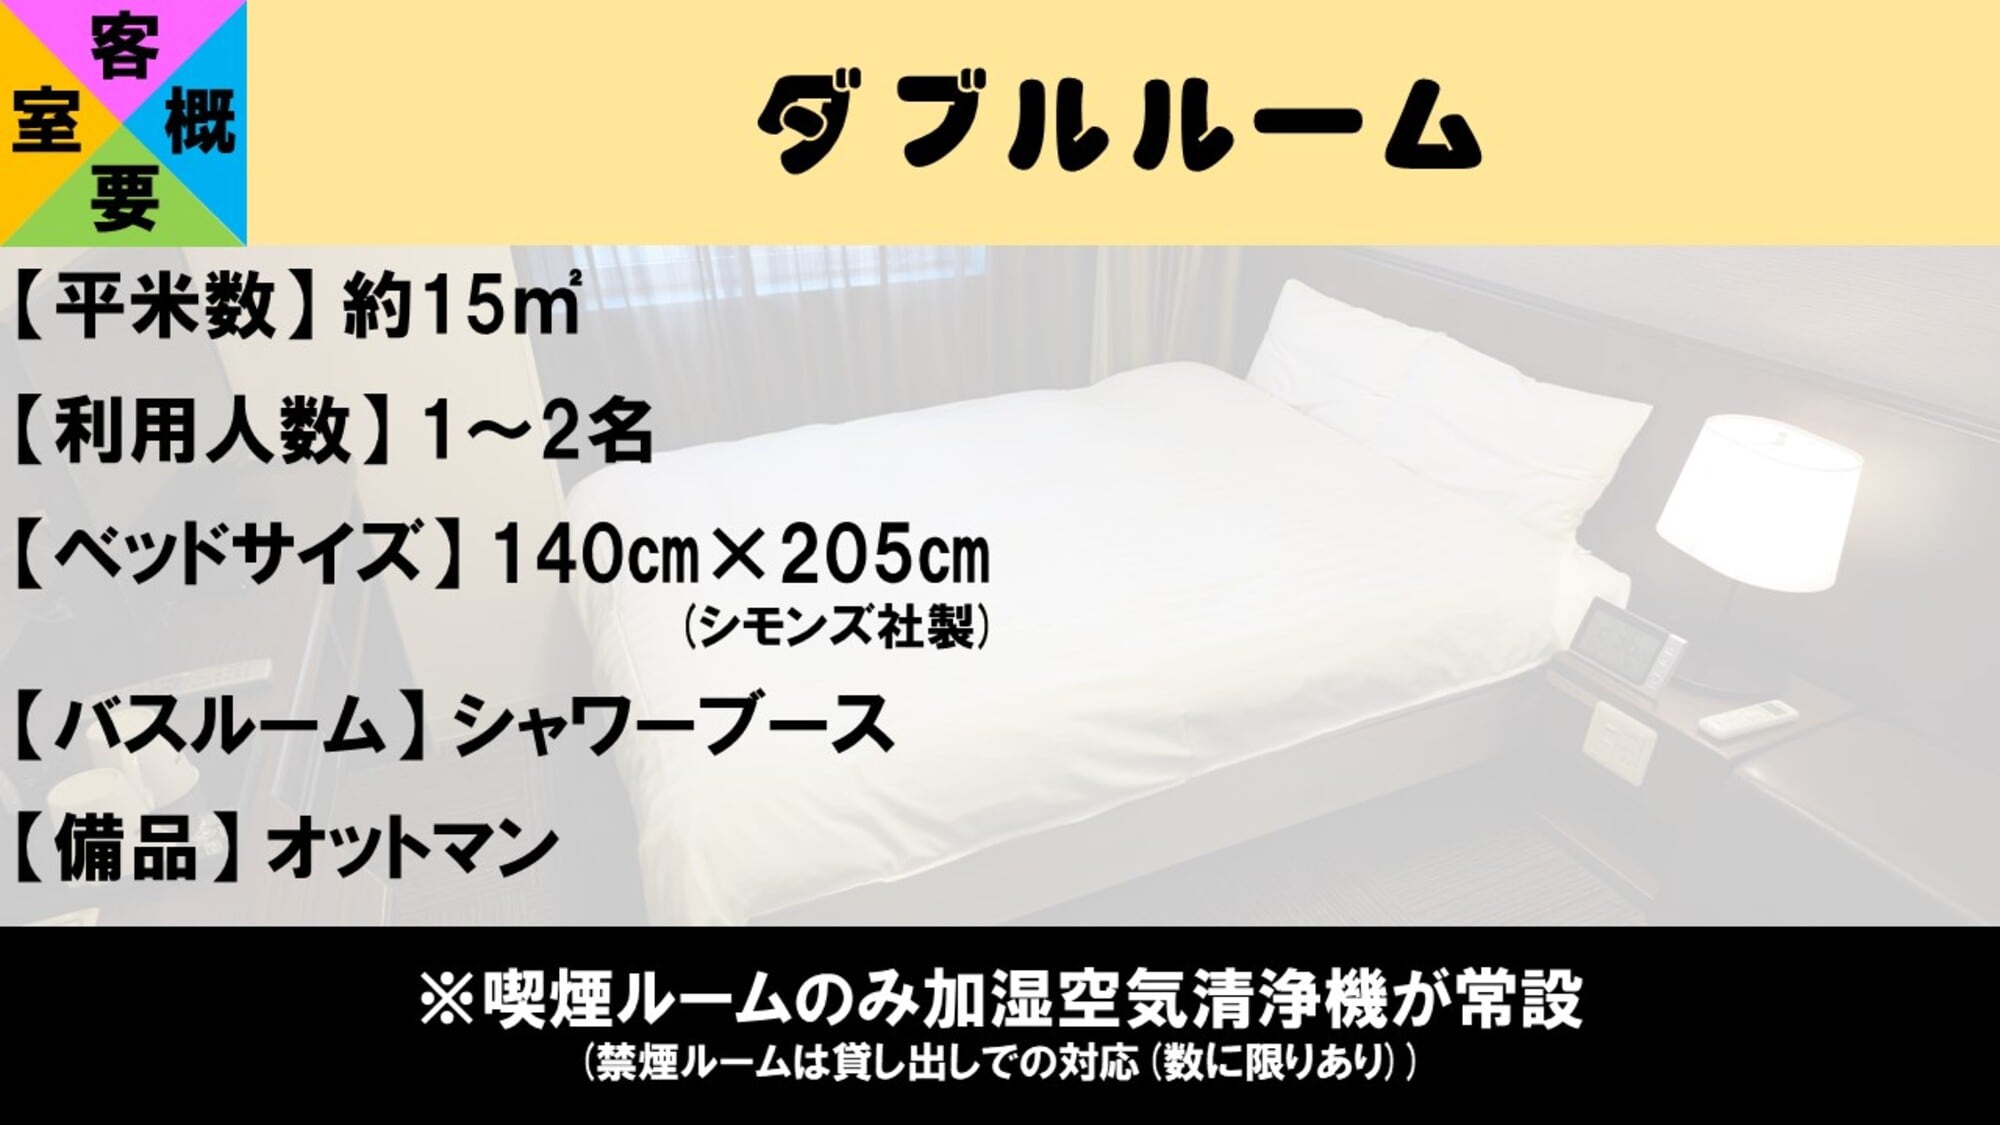 [Room overview] Double room